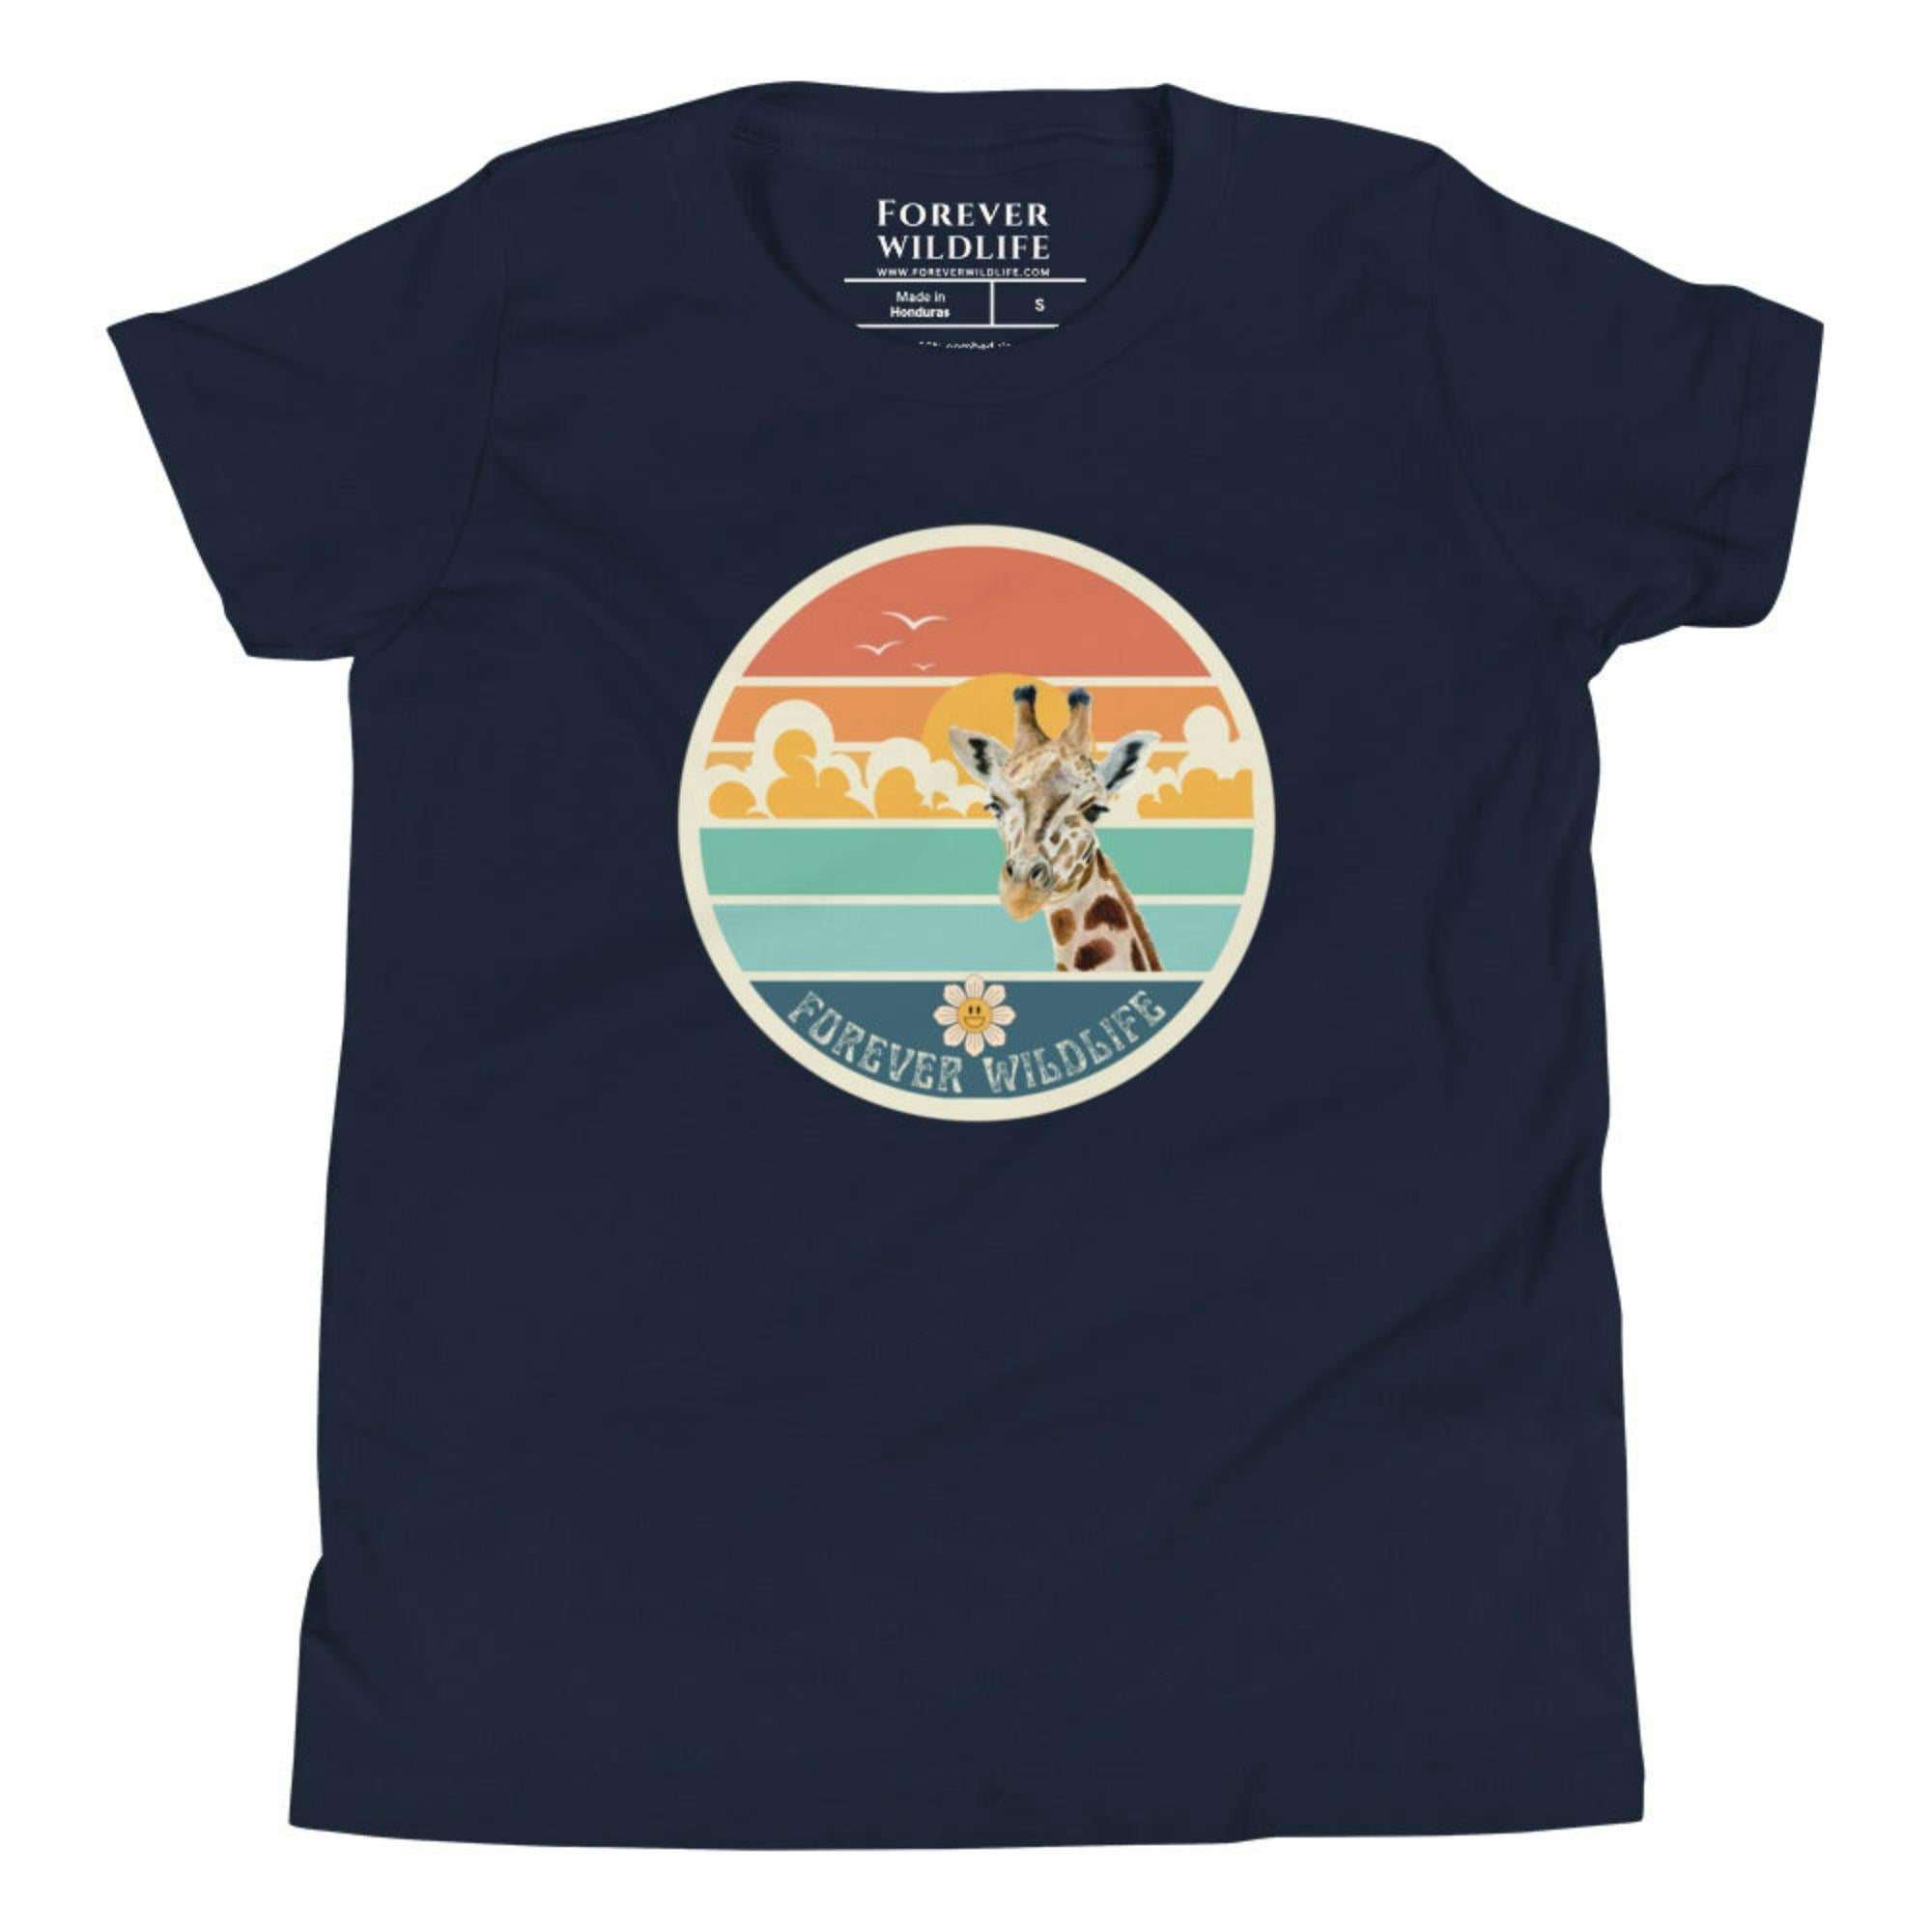 Navy Youth T-Shirt with Giraffe graphic as part of Wildlife T Shirts, Wildlife Clothing & Apparel by Forever Wildlife